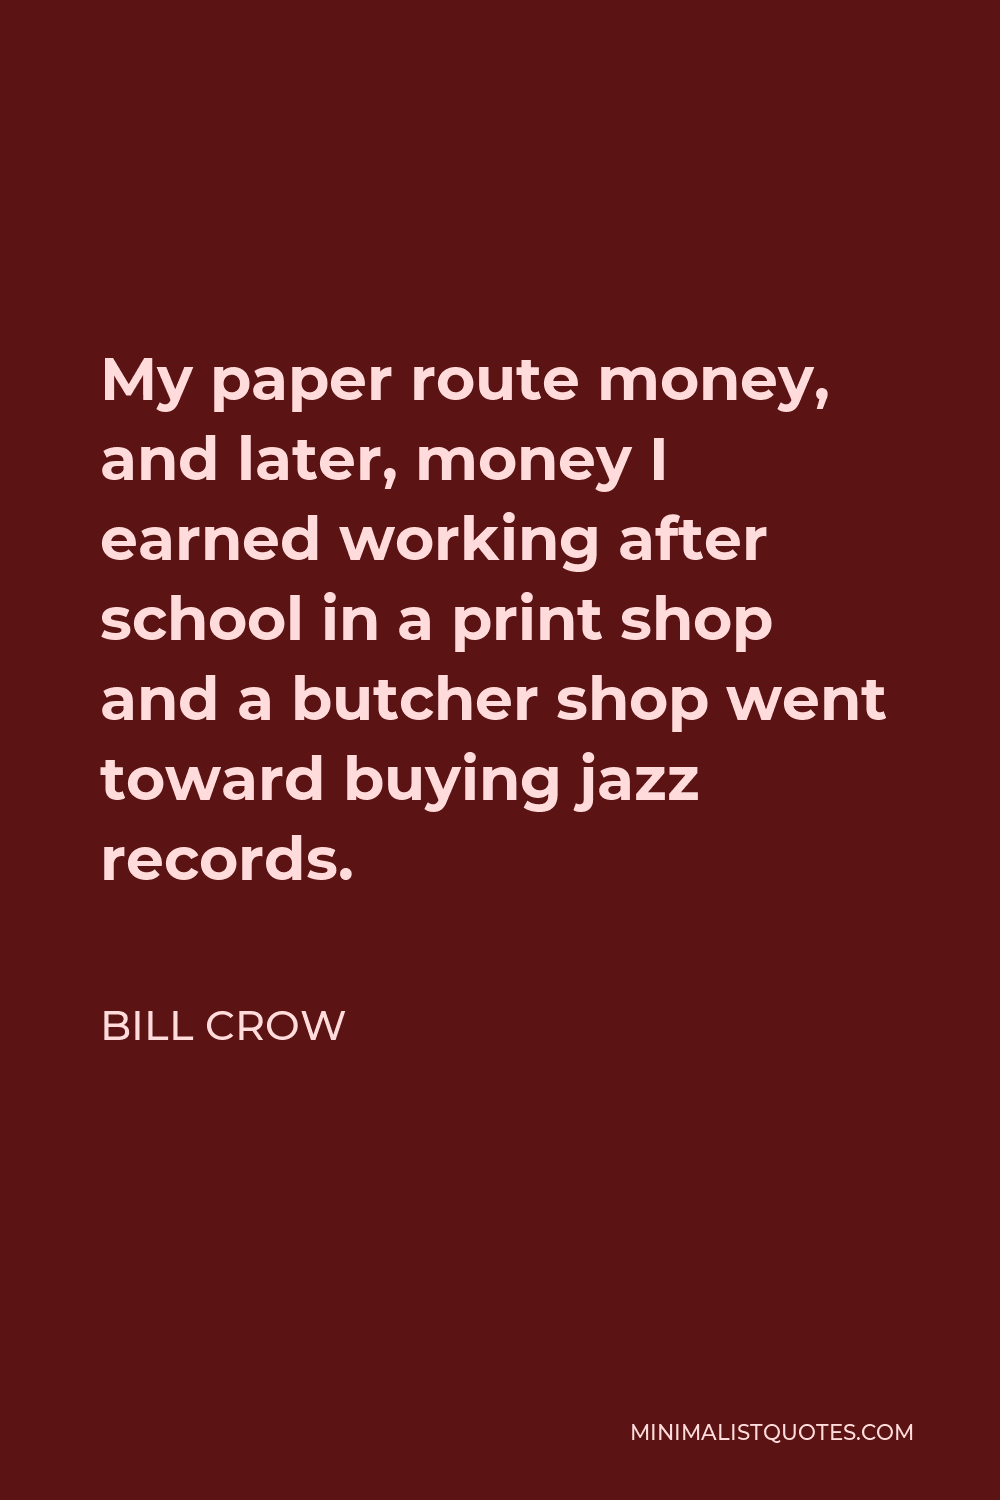 Bill Crow Quote - My paper route money, and later, money I earned working after school in a print shop and a butcher shop went toward buying jazz records.